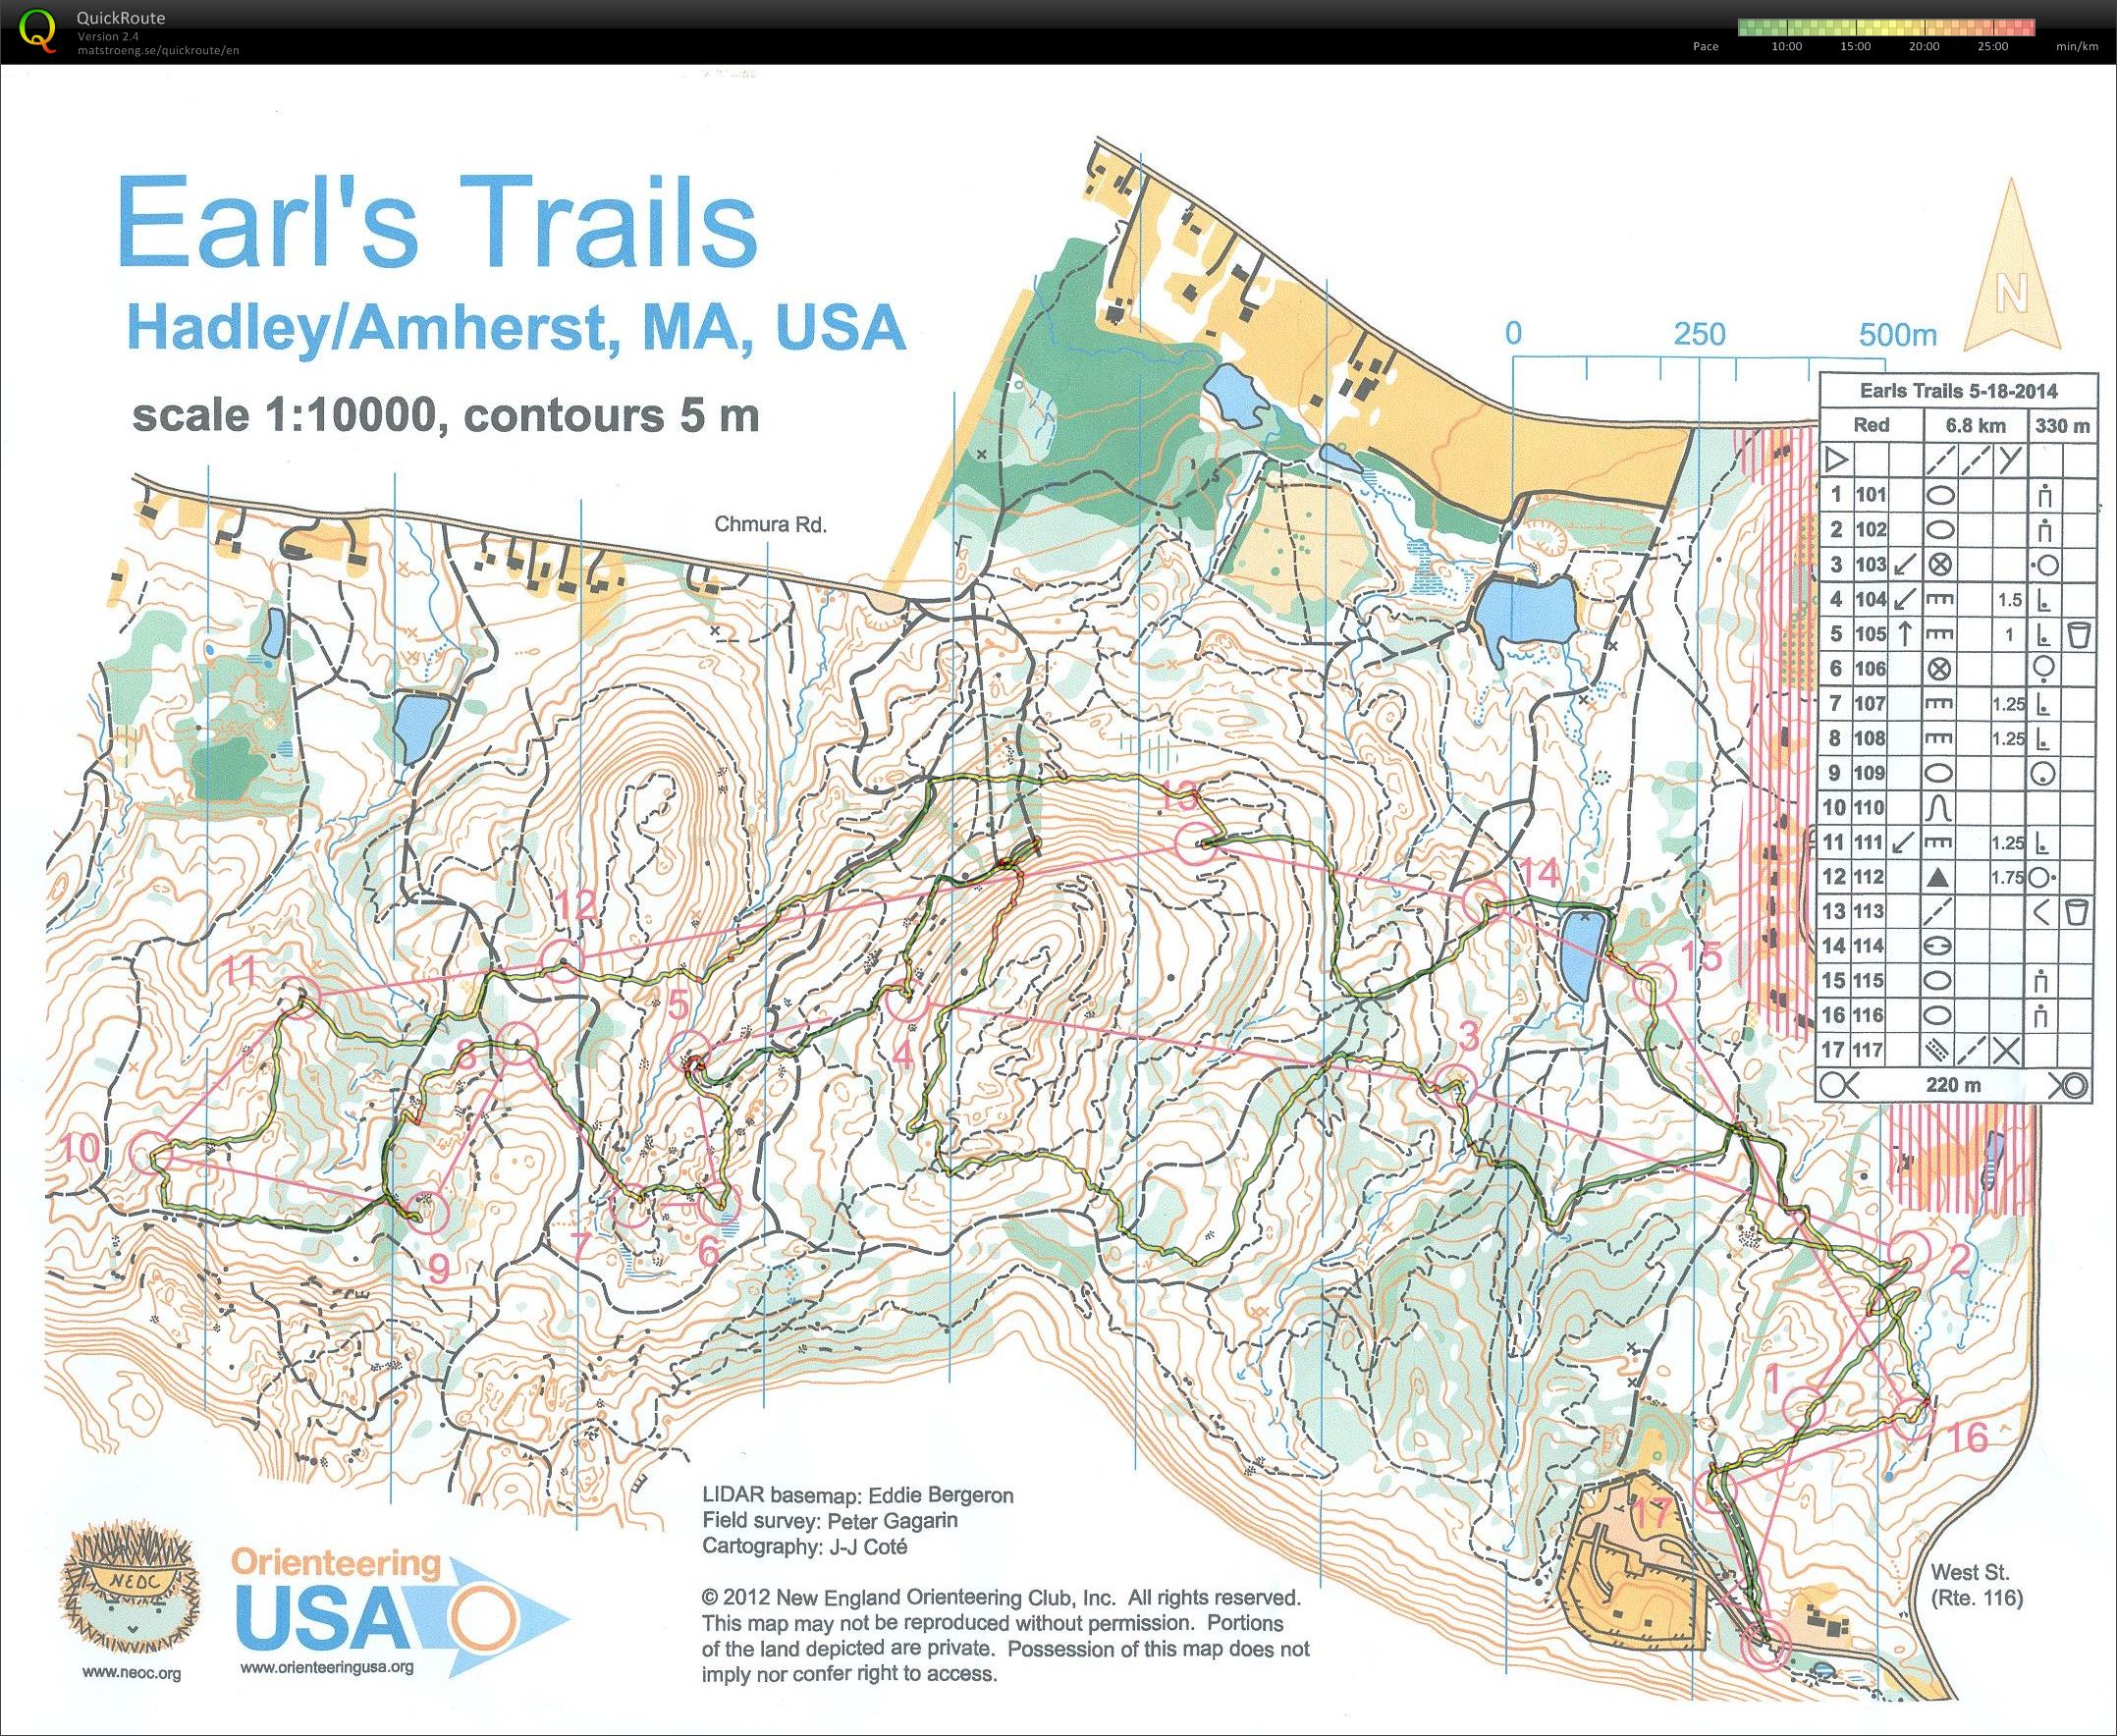 Earl's Trails Red Course (18-05-2014)